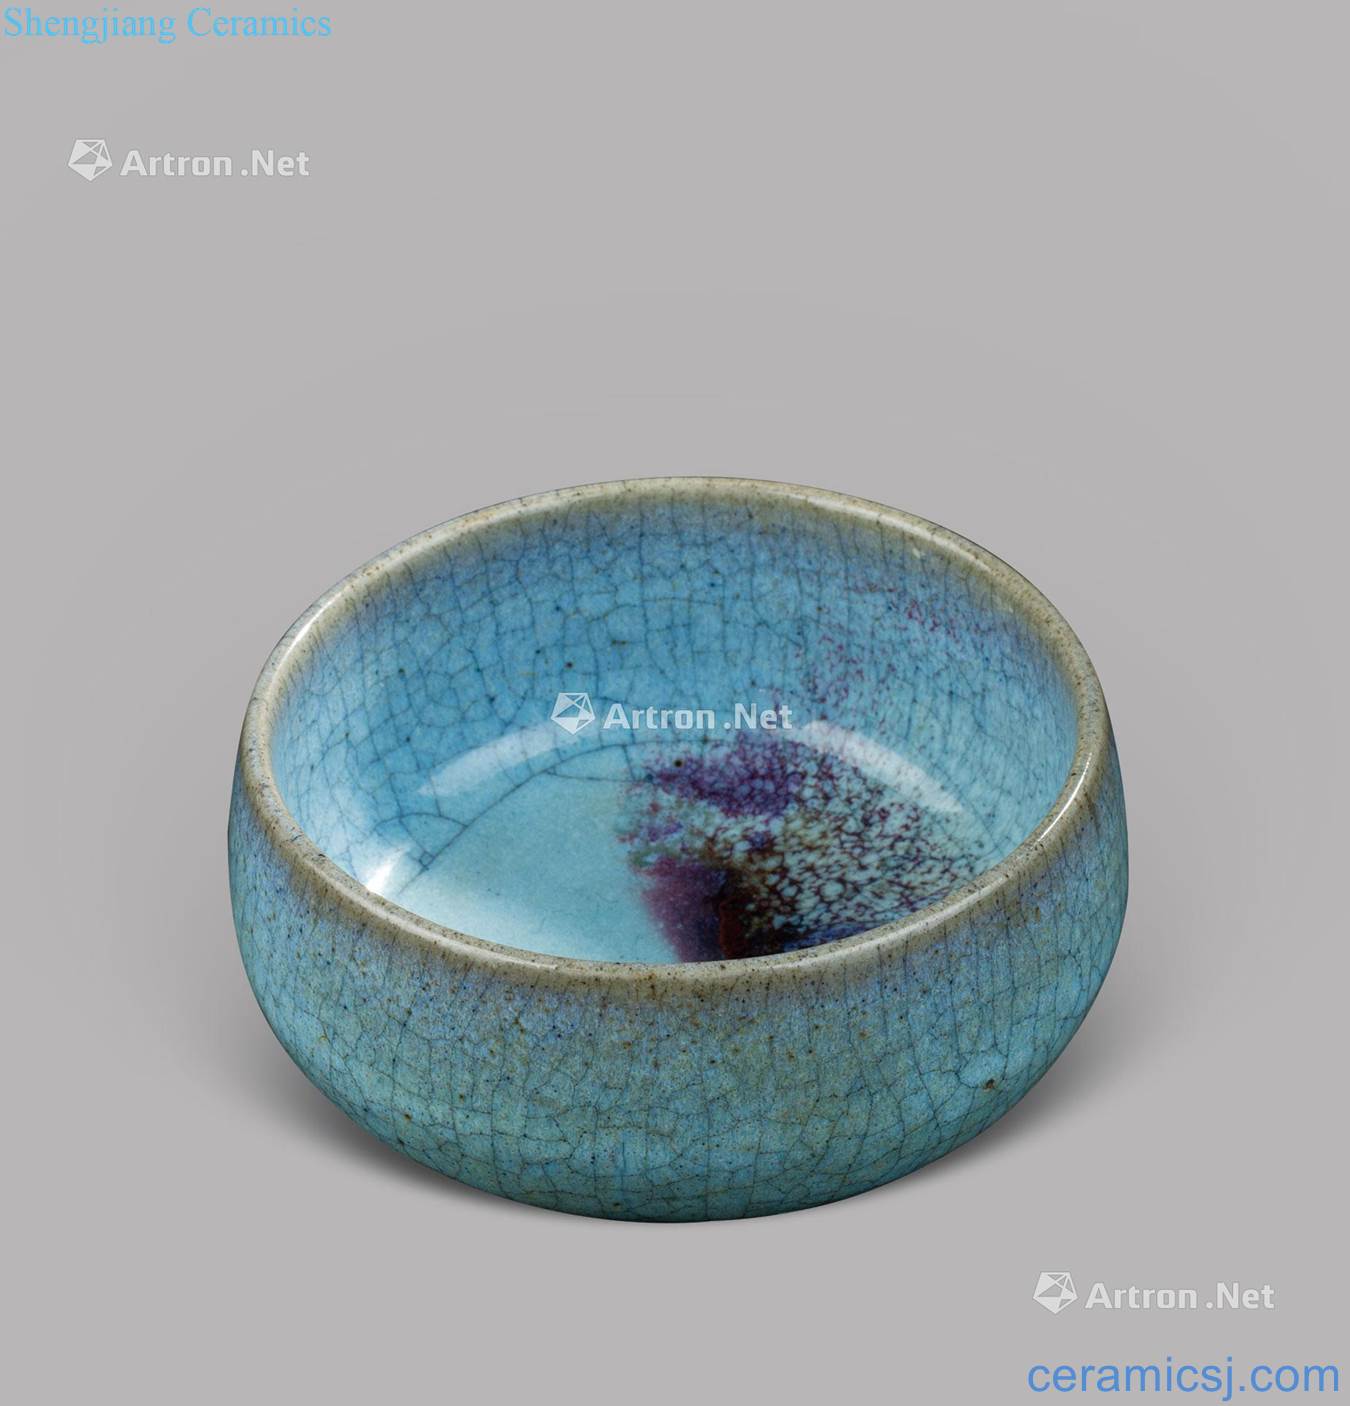 The song dynasty (960-1279), erythema masterpieces bowl